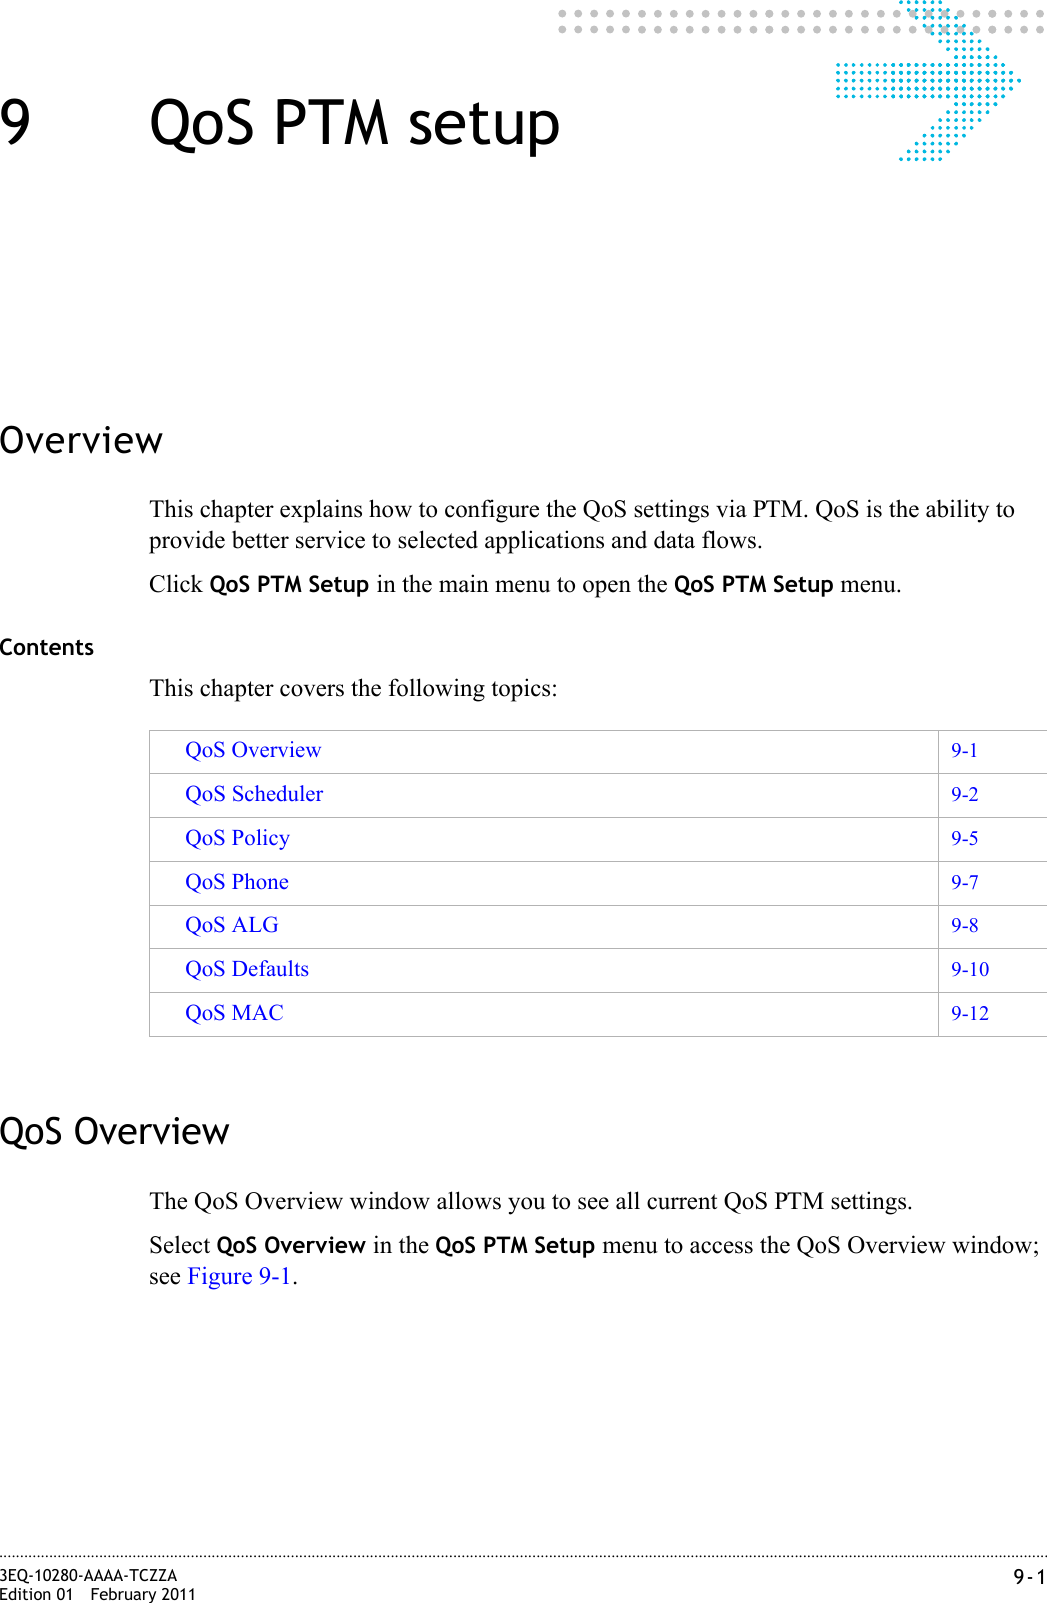 9-13EQ-10280-AAAA-TCZZAEdition 01 February 2011............................................................................................................................................................................................................................................................9QoS PTM setupOverviewThis chapter explains how to configure the QoS settings via PTM. QoS is the ability to provide better service to selected applications and data flows.Click QoS PTM Setup in the main menu to open the QoS PTM Setup menu.ContentsThis chapter covers the following topics:QoS OverviewThe QoS Overview window allows you to see all current QoS PTM settings.Select QoS Overview in the QoS PTM Setup menu to access the QoS Overview window; see Figure 9-1.QoS Overview 9-1QoS Scheduler 9-2QoS Policy 9-5QoS Phone 9-7QoS ALG 9-8QoS Defaults 9-10QoS MAC 9-12